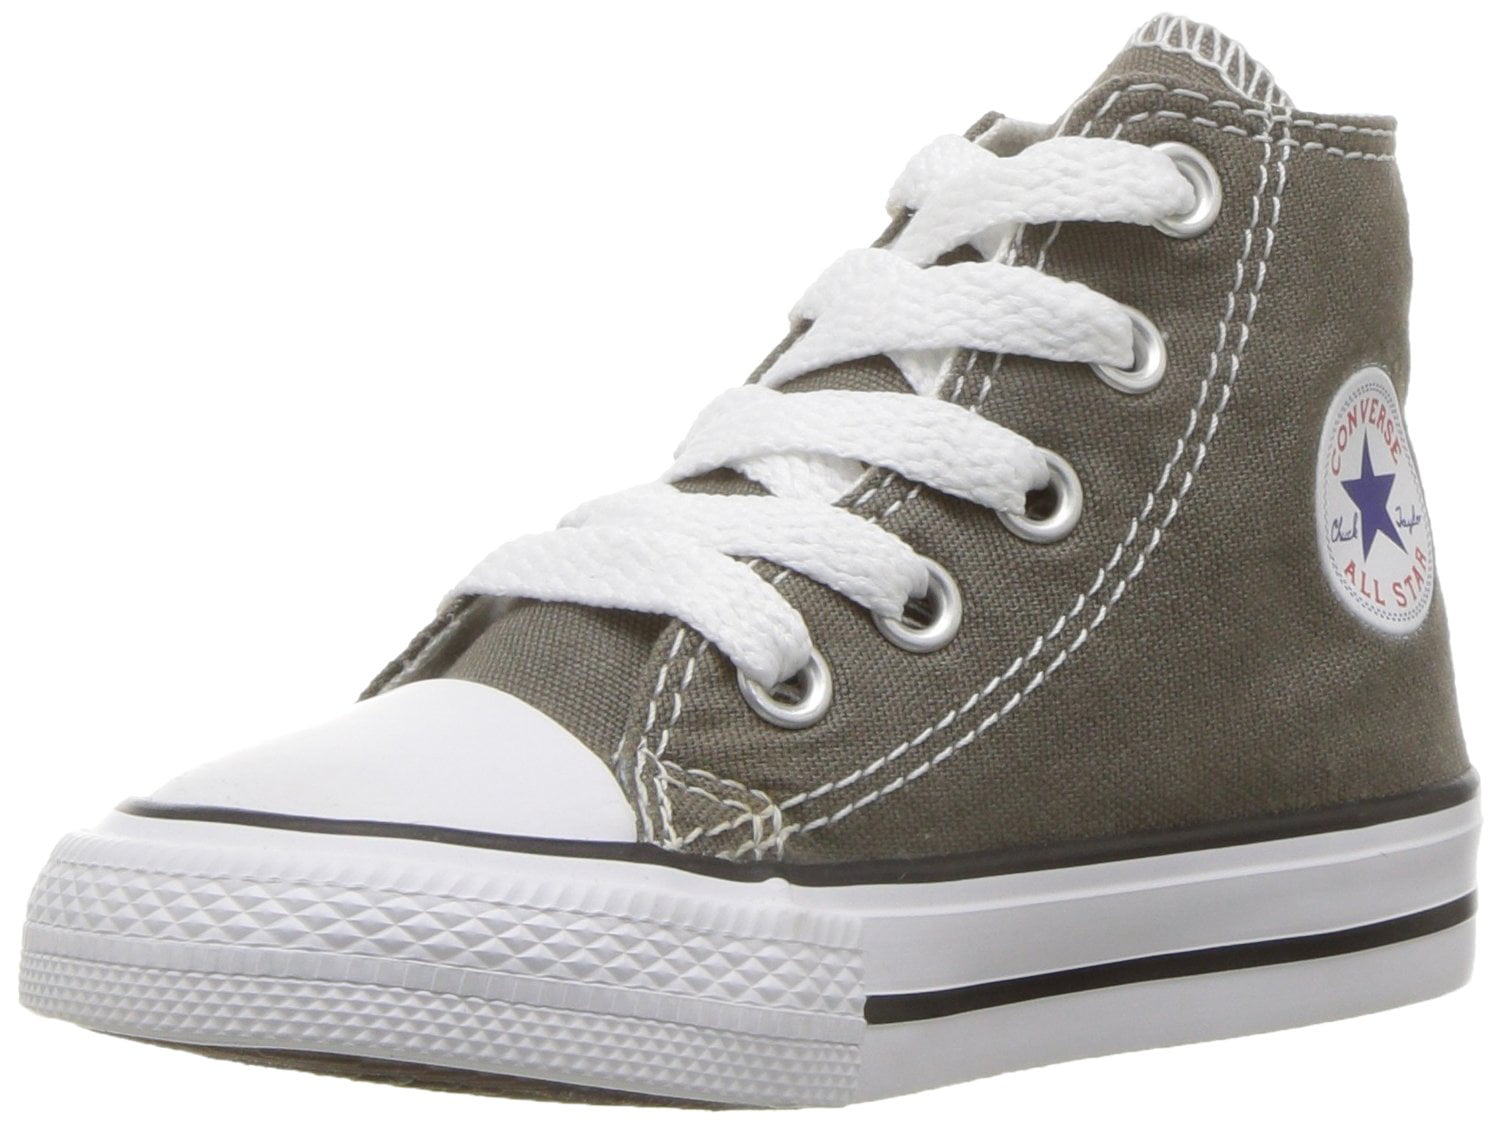 converse bianche limited edition xbox one